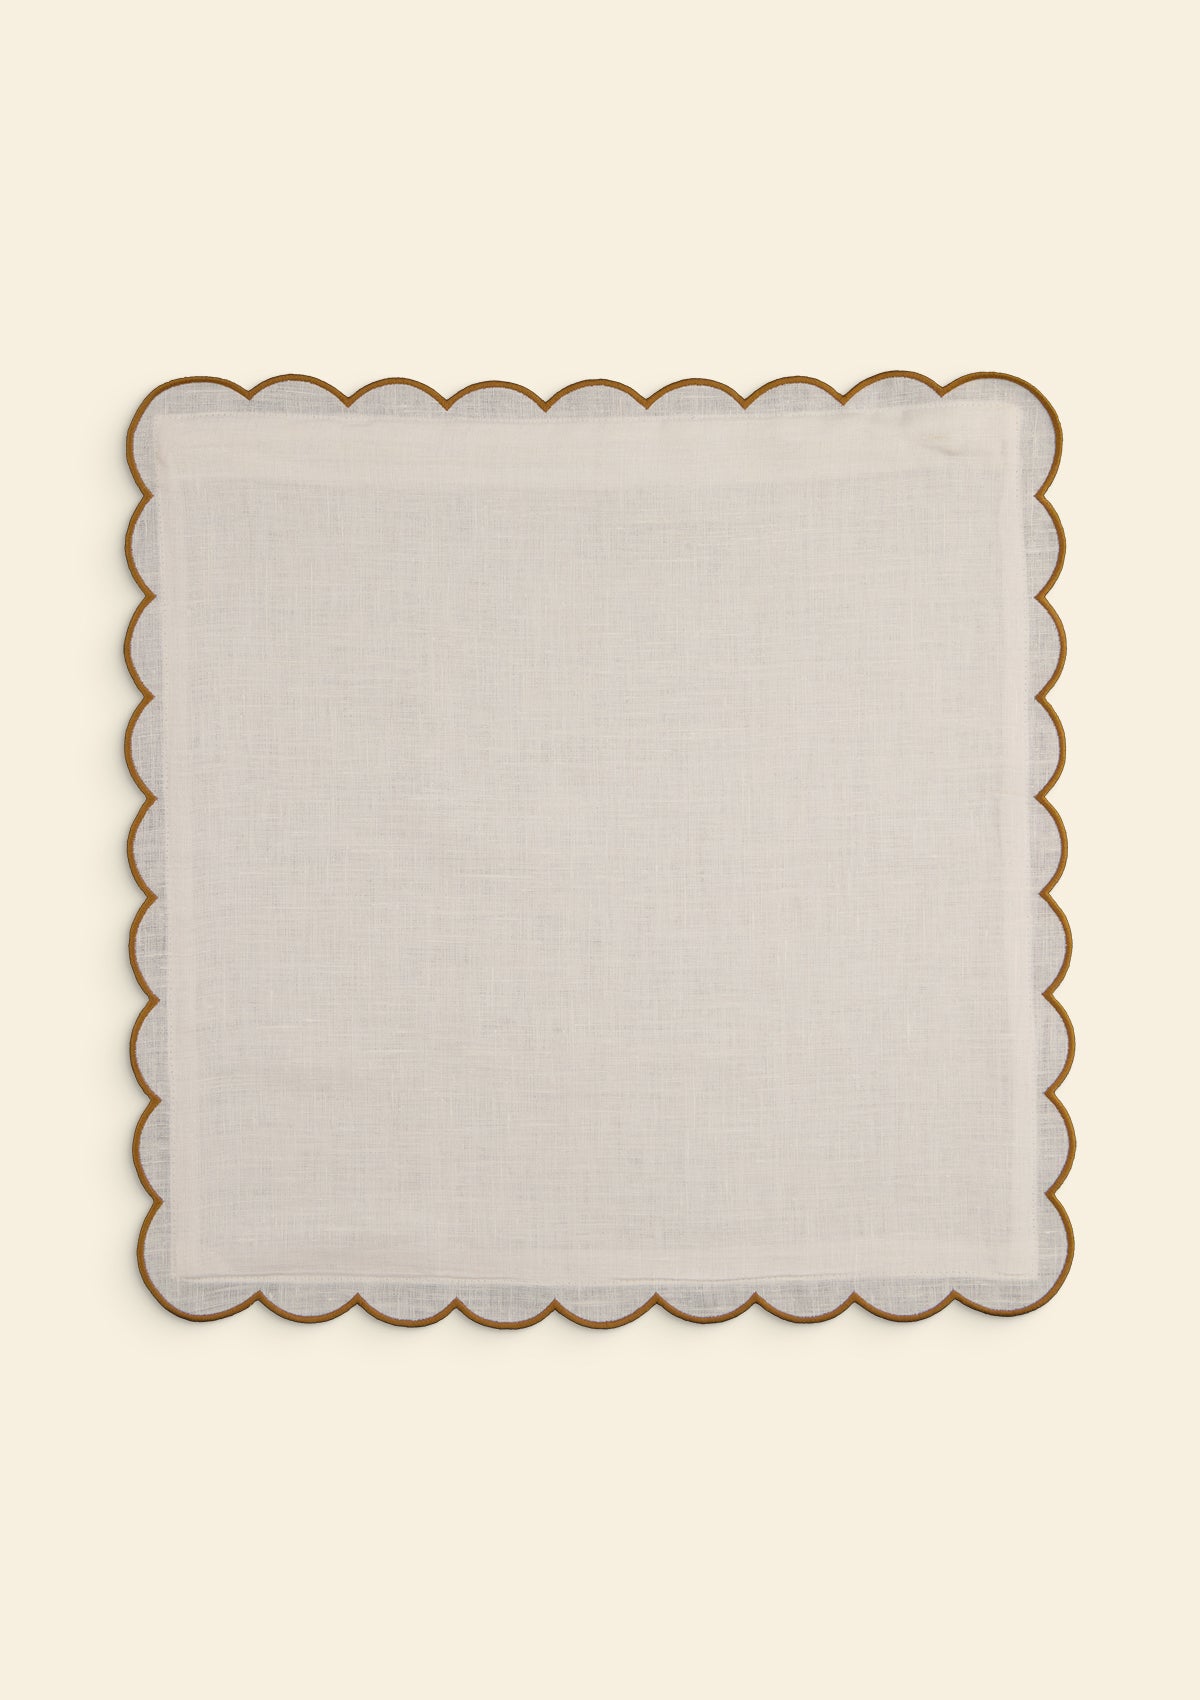 The square scalloped linen cushion in White & Yellow ocher